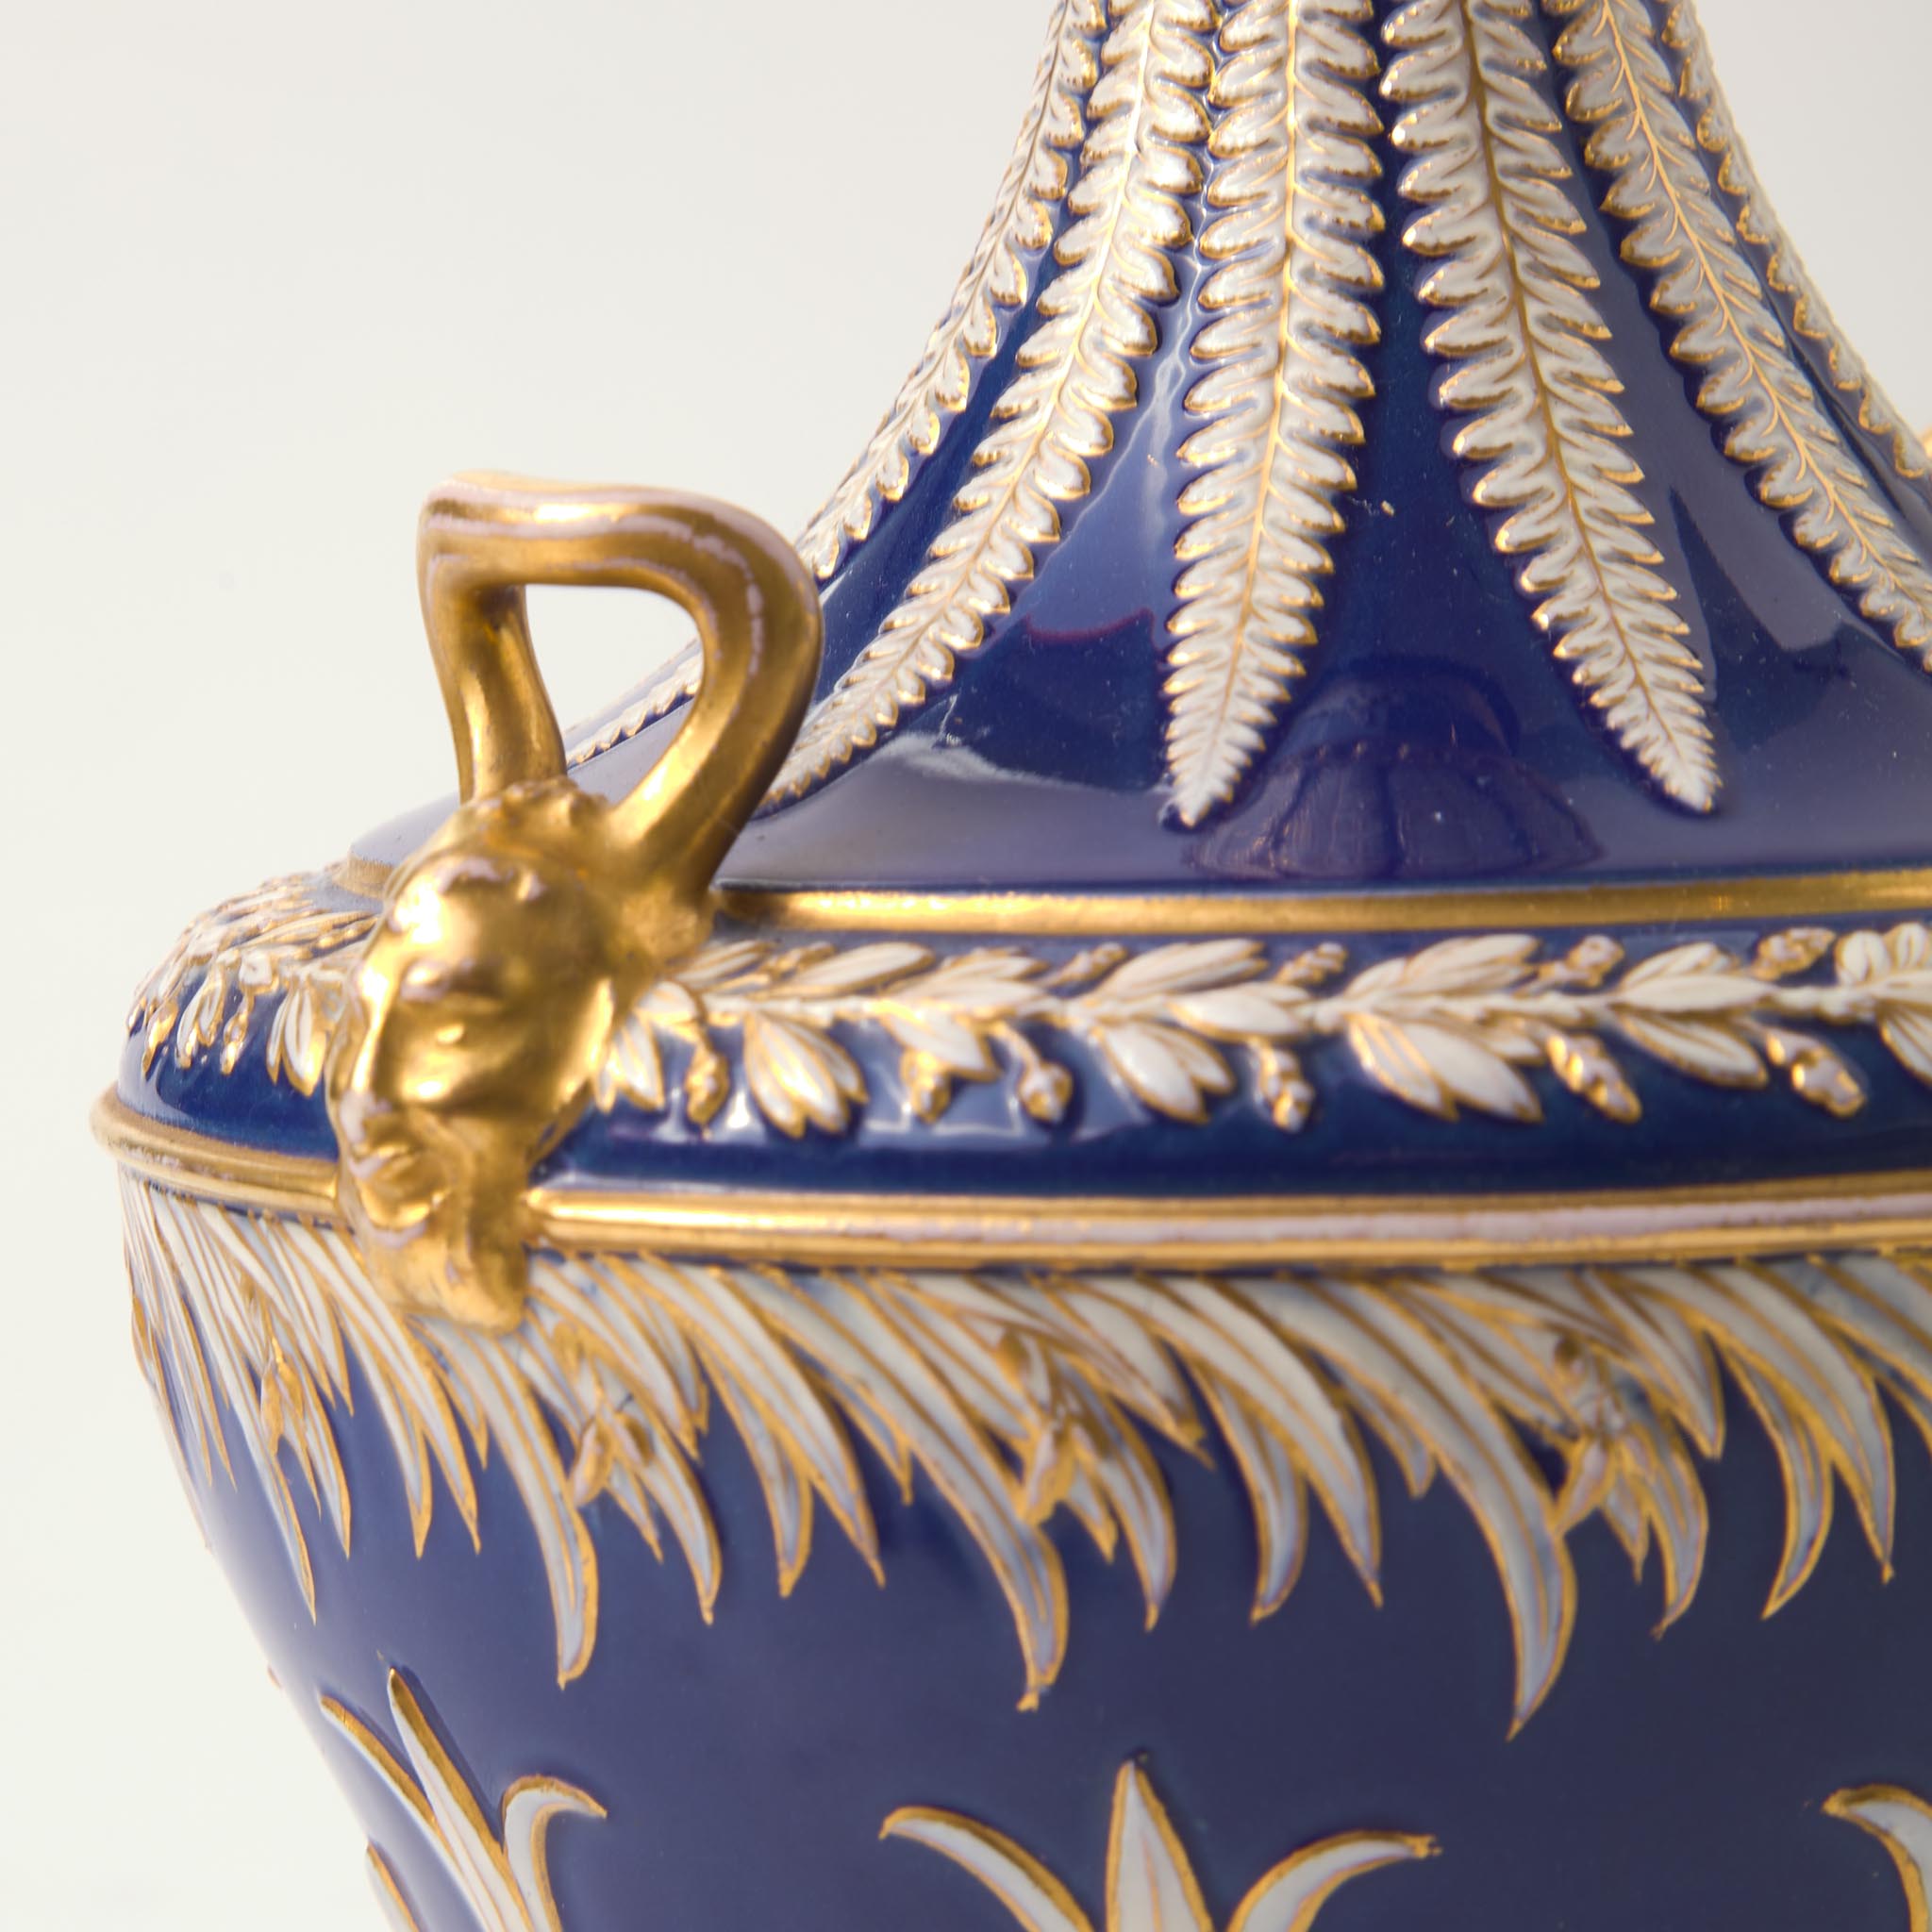 A Wedgwood Victoria Ware Covered Vase UK, circa 1880 - Image 2 of 3